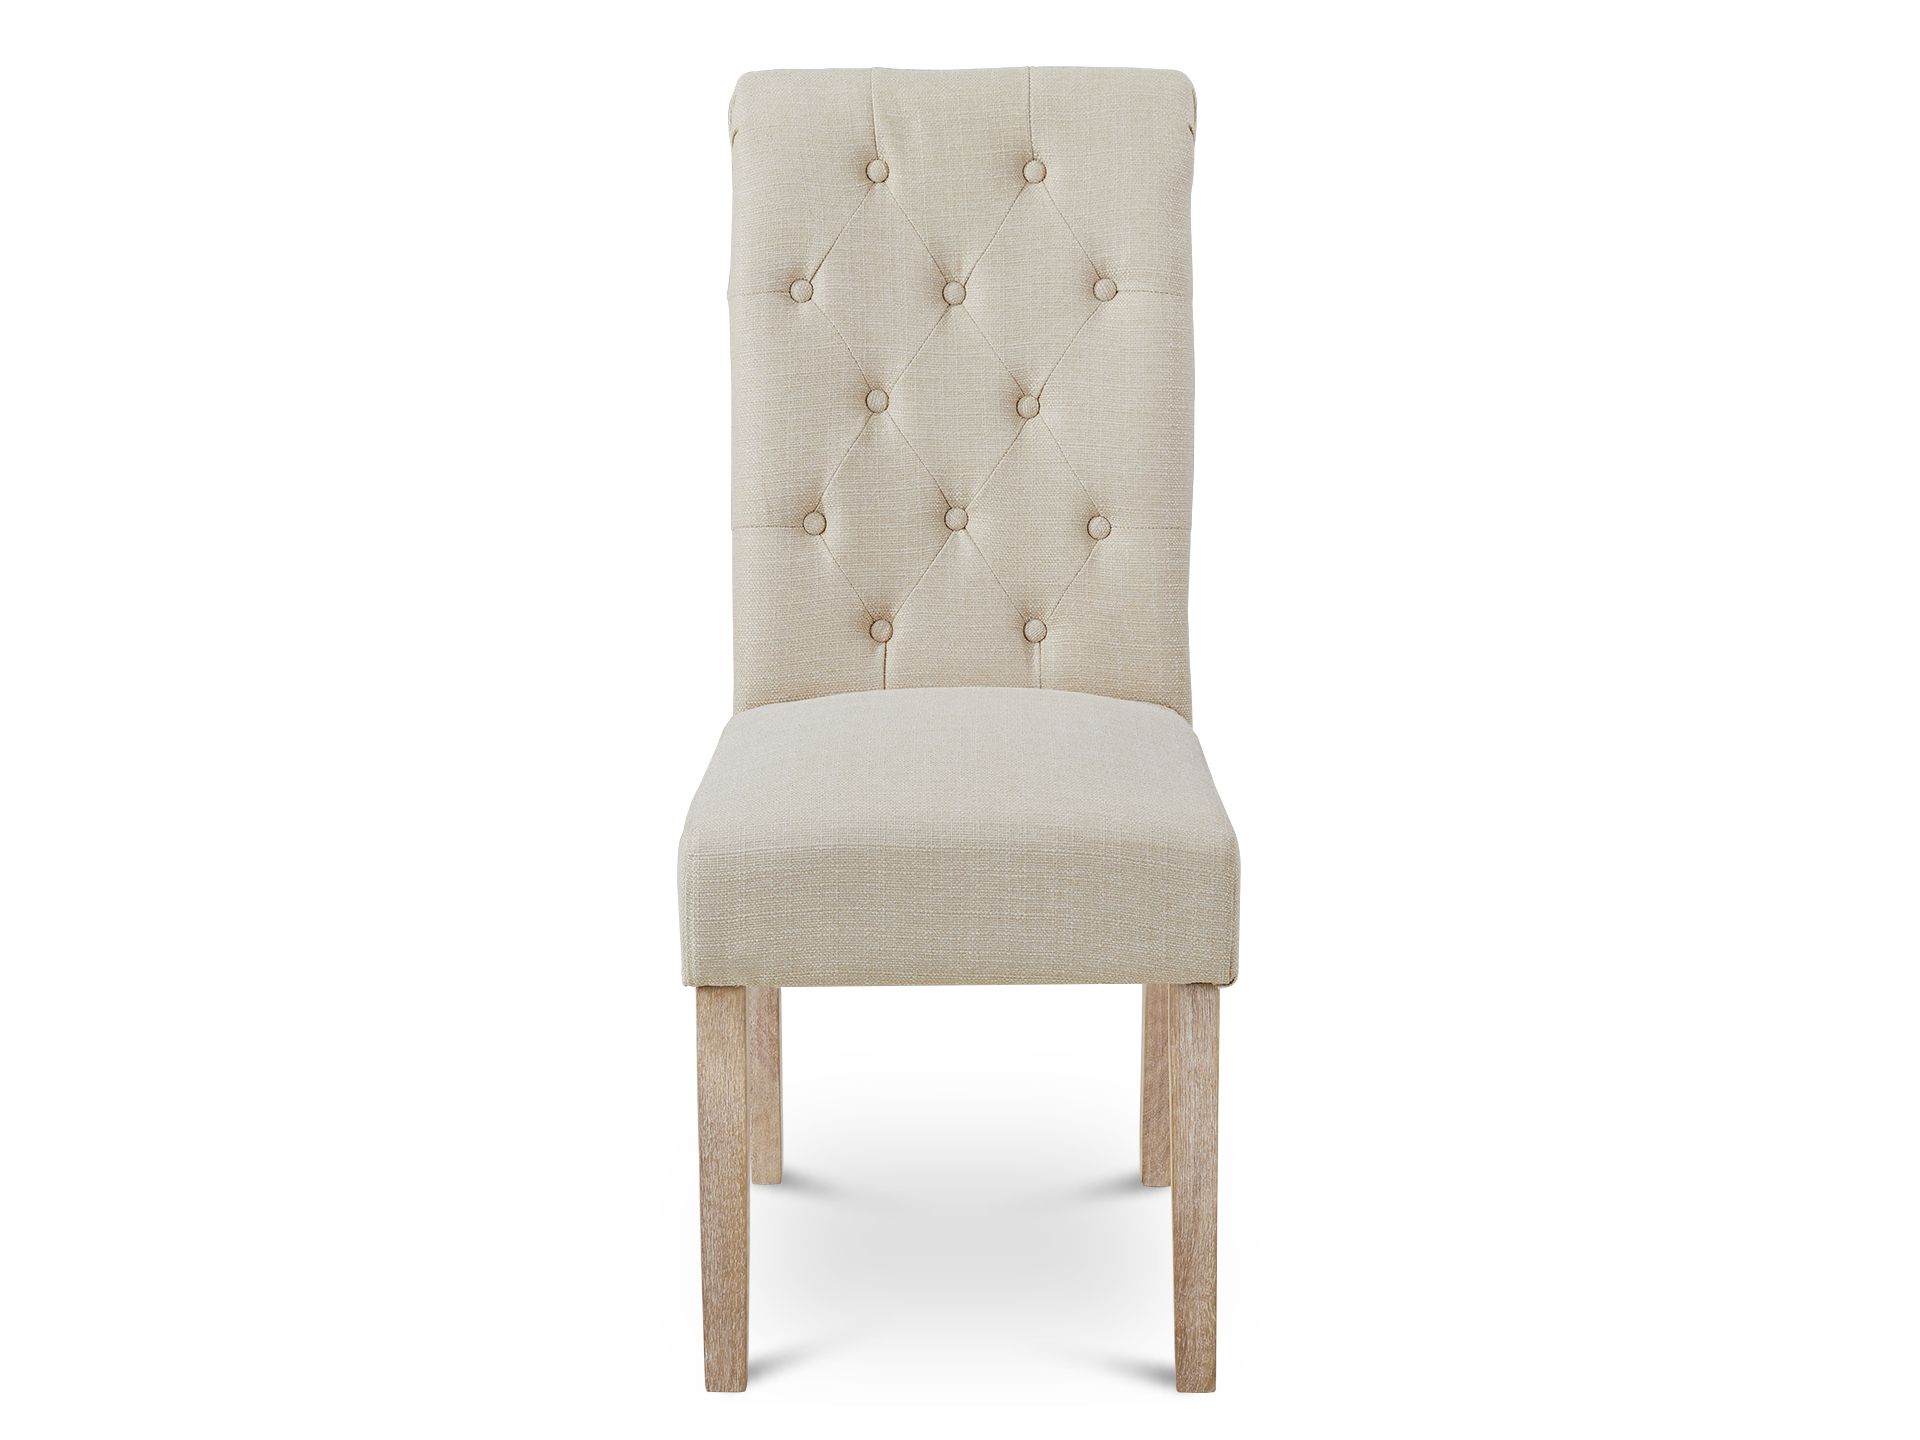 Zoey 6 Piece Upholstered Dining Chair - Beige